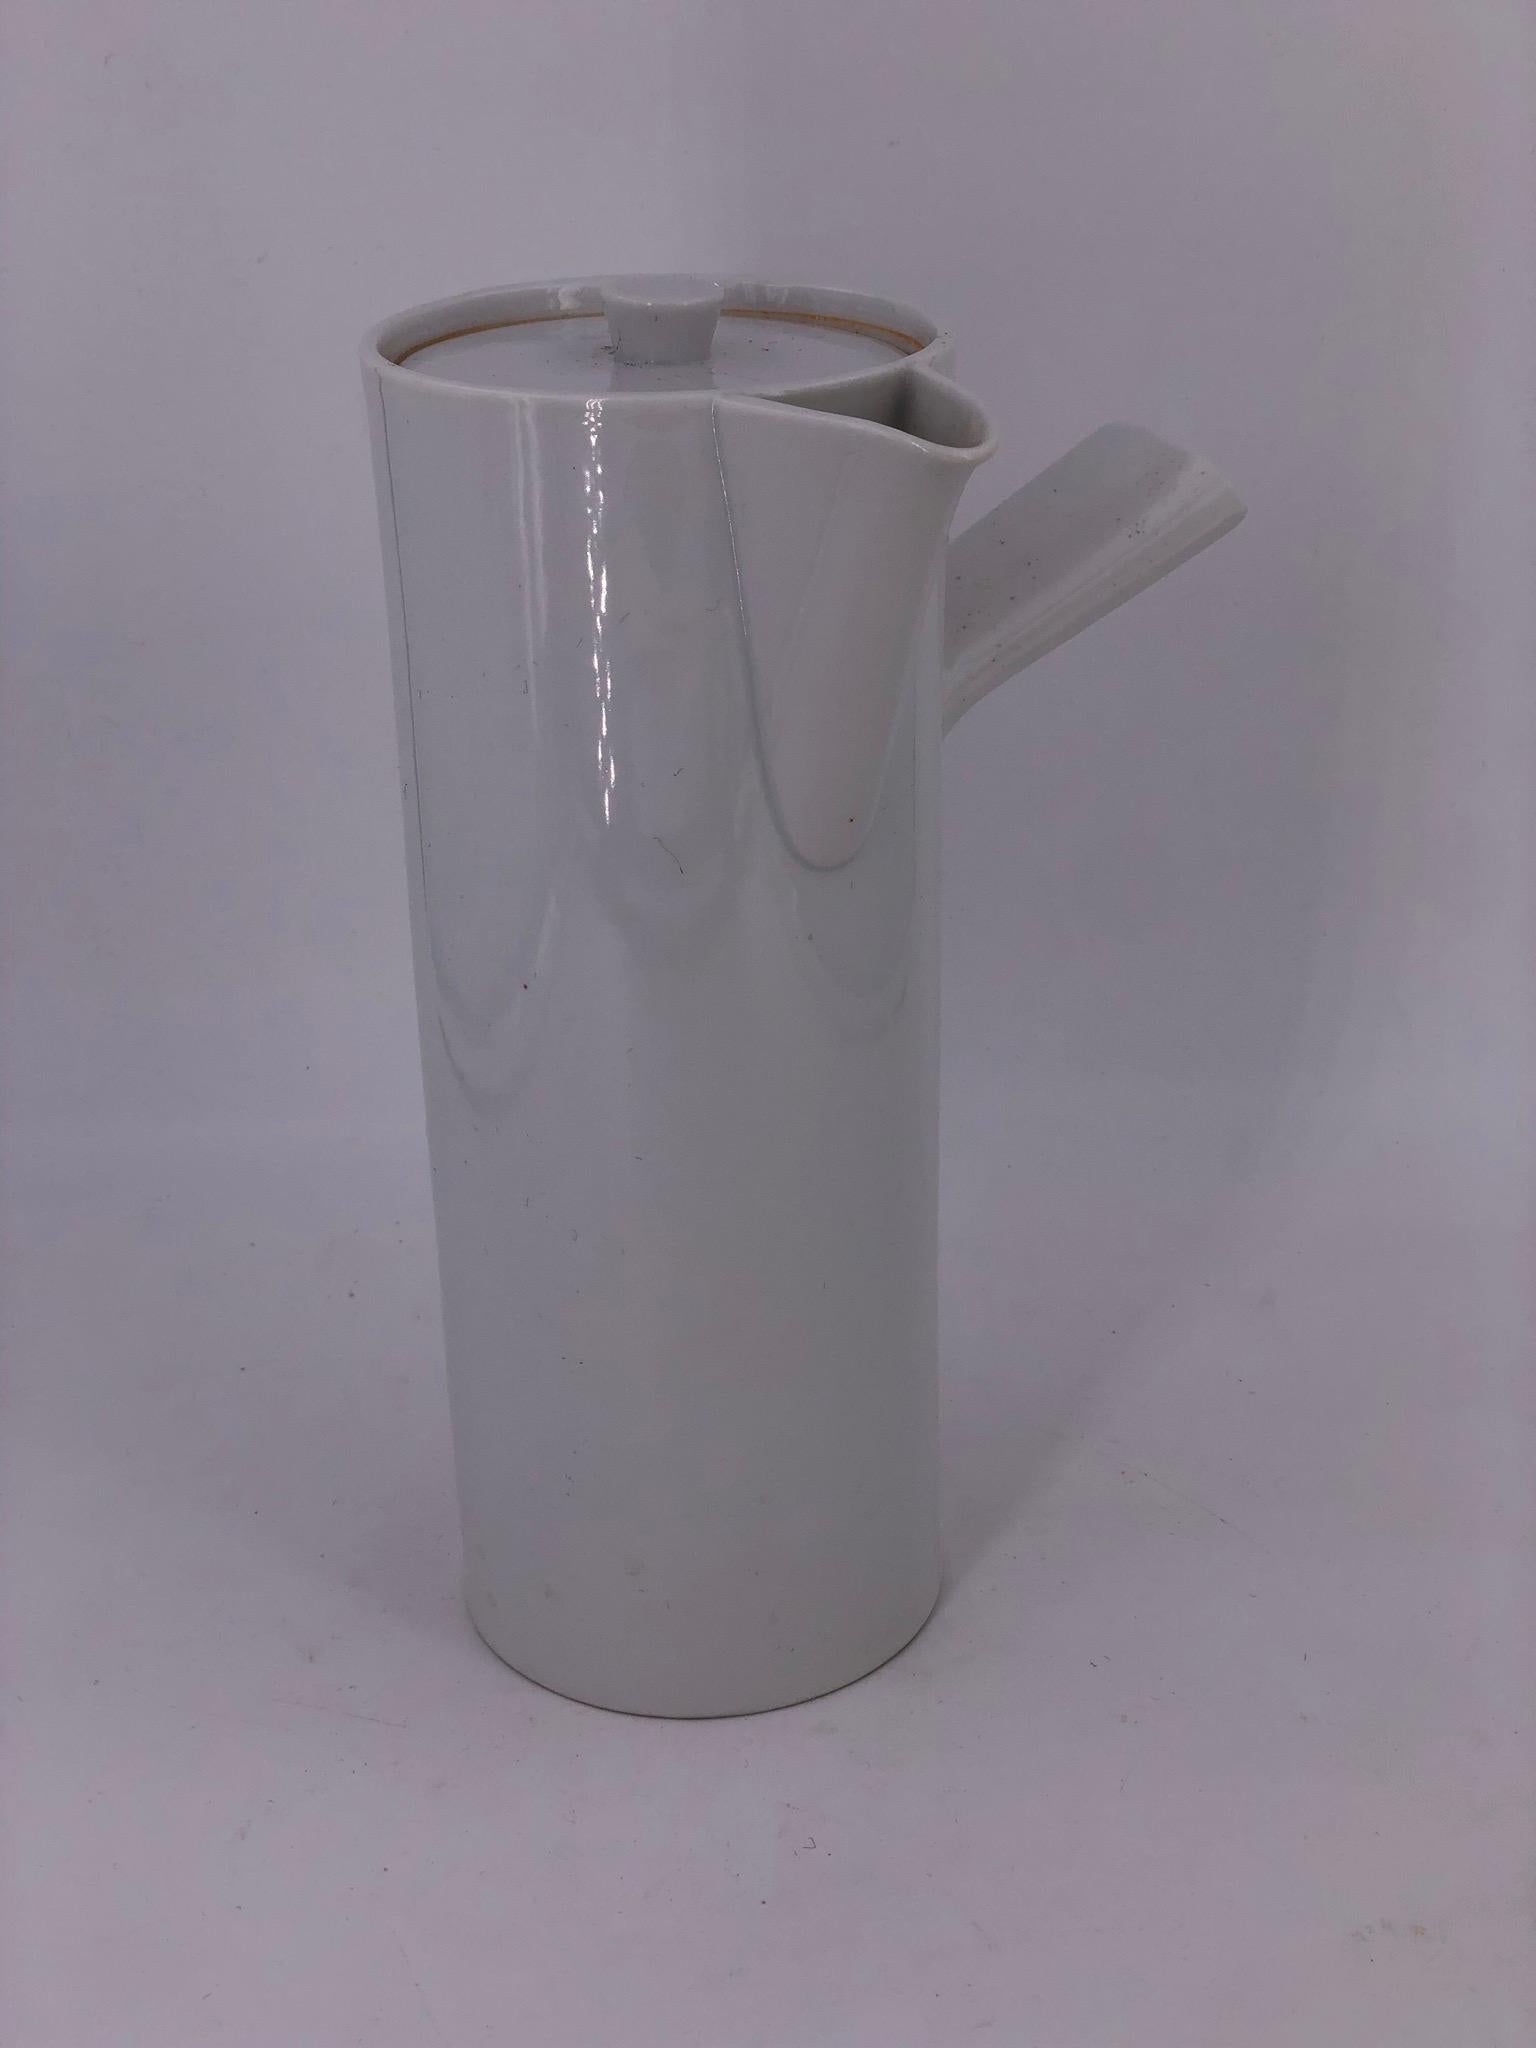 A beautiful tall white porcelain coffee pitcher, in the style of Kenji Fujita, circa 1960s unmarked in great condition.